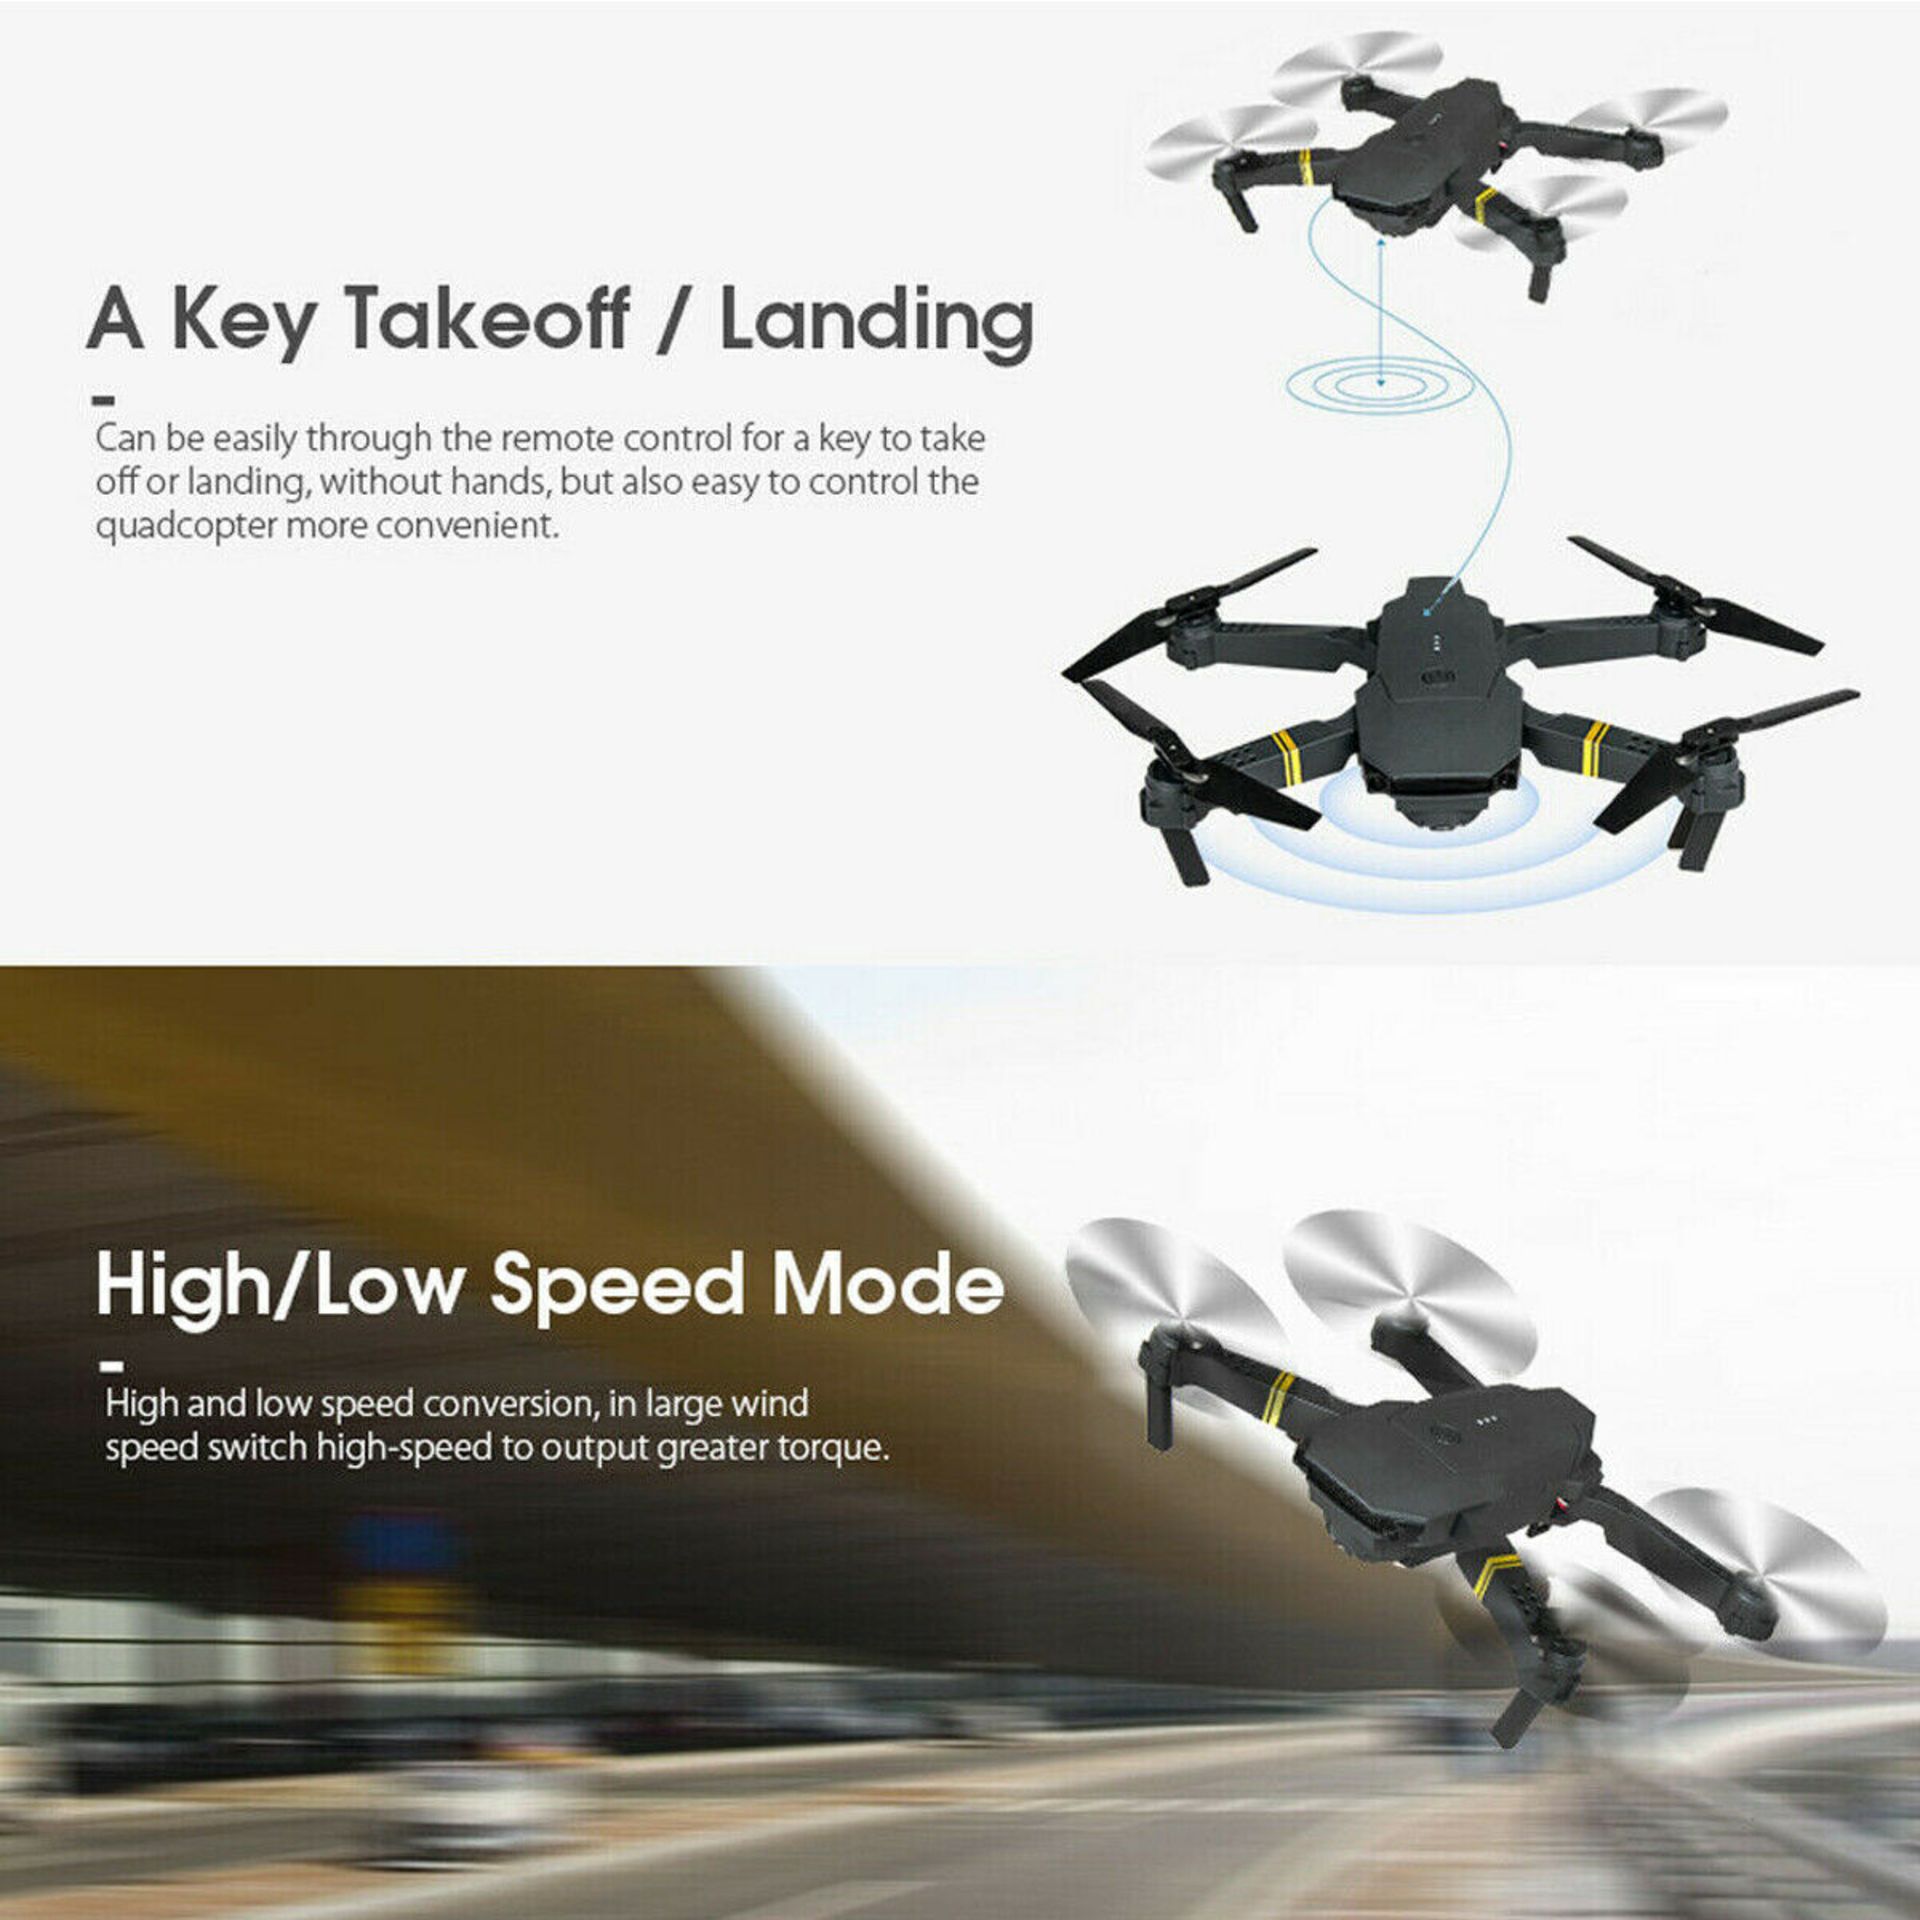 NEW & UNUSED DRONE X PRO WIFI FPV 1080p HD CAMERA FOLDABLE RC QUADCOPTER + CASE/ BAG *NO VAT* - Image 8 of 11